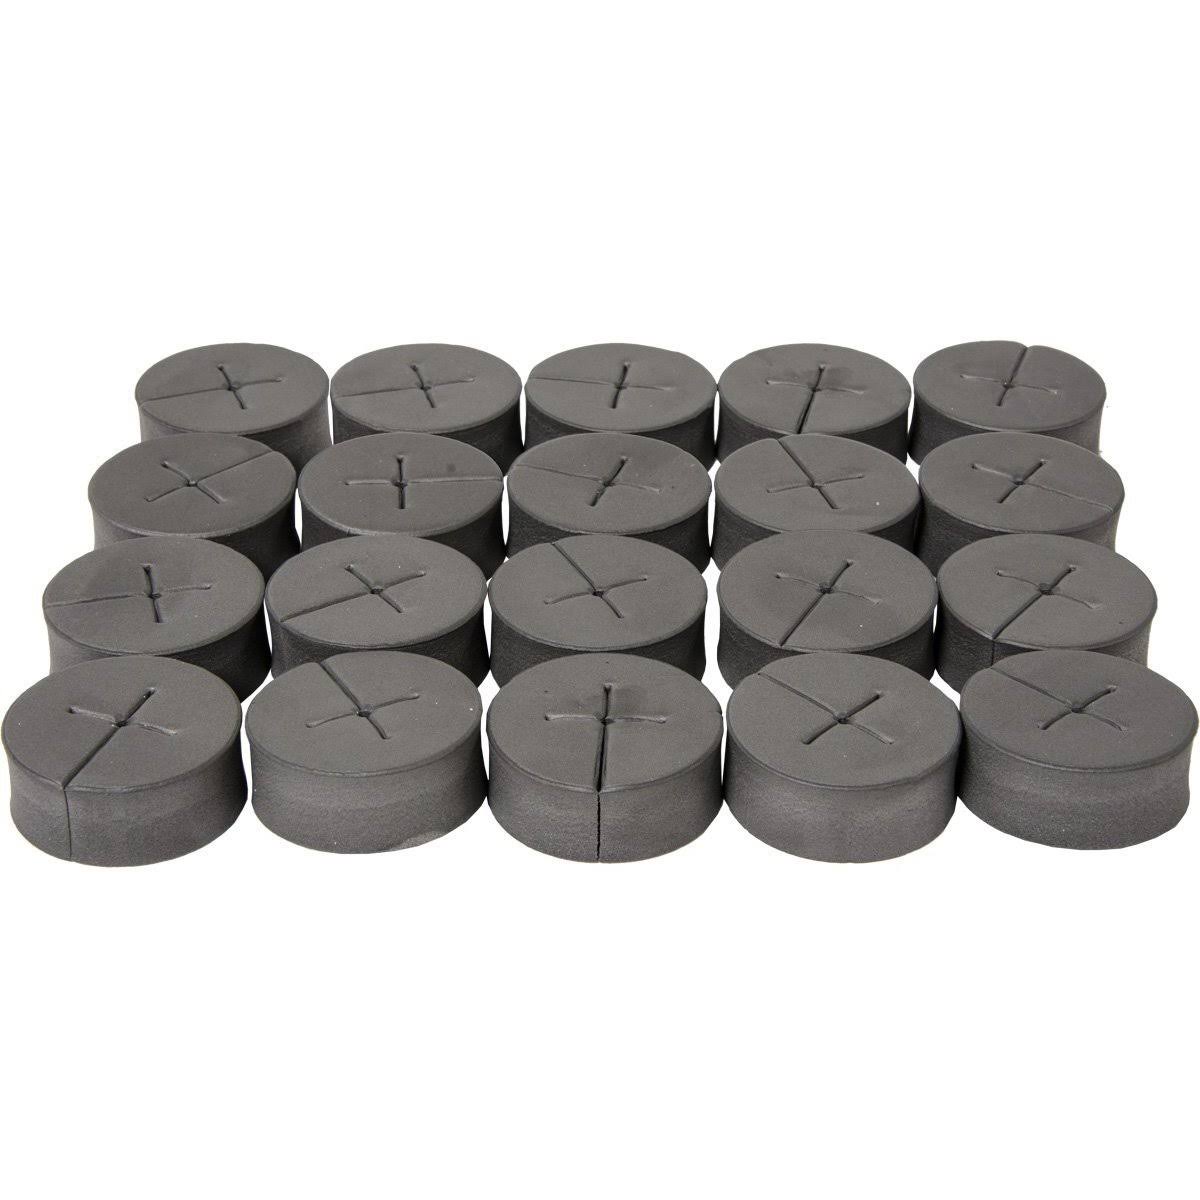 oxyCLONE oxyCERTS Black - Pack of 20